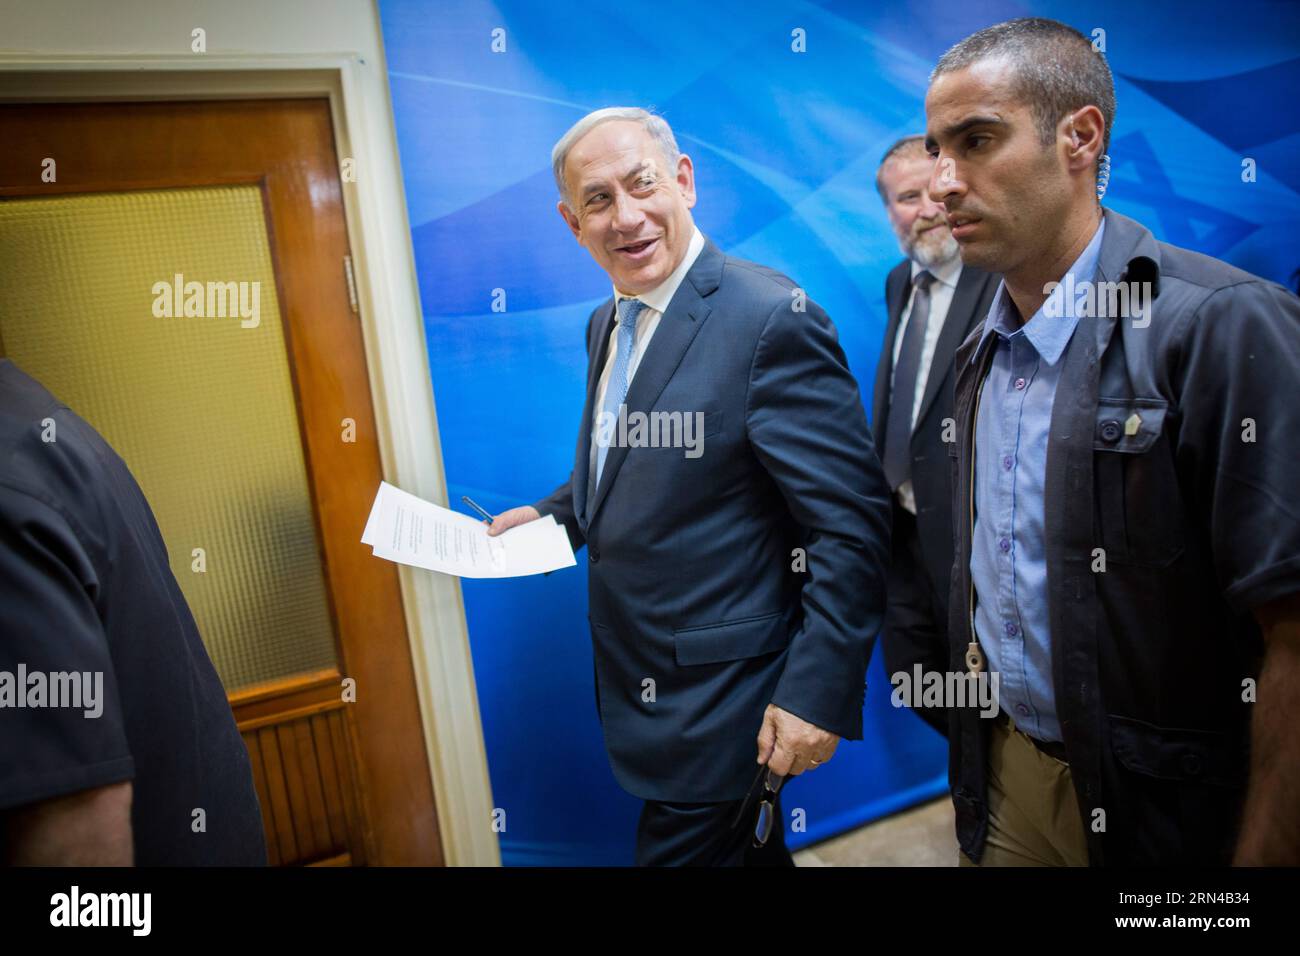 (150515) -- JERUSALEM, May 15, 2015 -- Israeli Prime Minister Benjamin Netanyahu (C) arrives for the first cabinet meeting of the Israel s 34th government at the Prime Minister s office in Jerusalem, on May 15, 2015. Israeli Prime Minister Benjamin Netanyahu s right-wing new coalition government was sworn in late Thursday night, after the parliament approved it by a razor-thin 61-59 majority. JINI/) (lrz) MIDEAST-JERUSALEM-ISRAEL-34TH GOV T-FIRST CABINET MEETING YonatanxSindel PUBLICATIONxNOTxINxCHN   Jerusalem May 15 2015 Israeli Prime Ministers Benjamin Netanyahu C arrives for The First Cabi Stock Photo